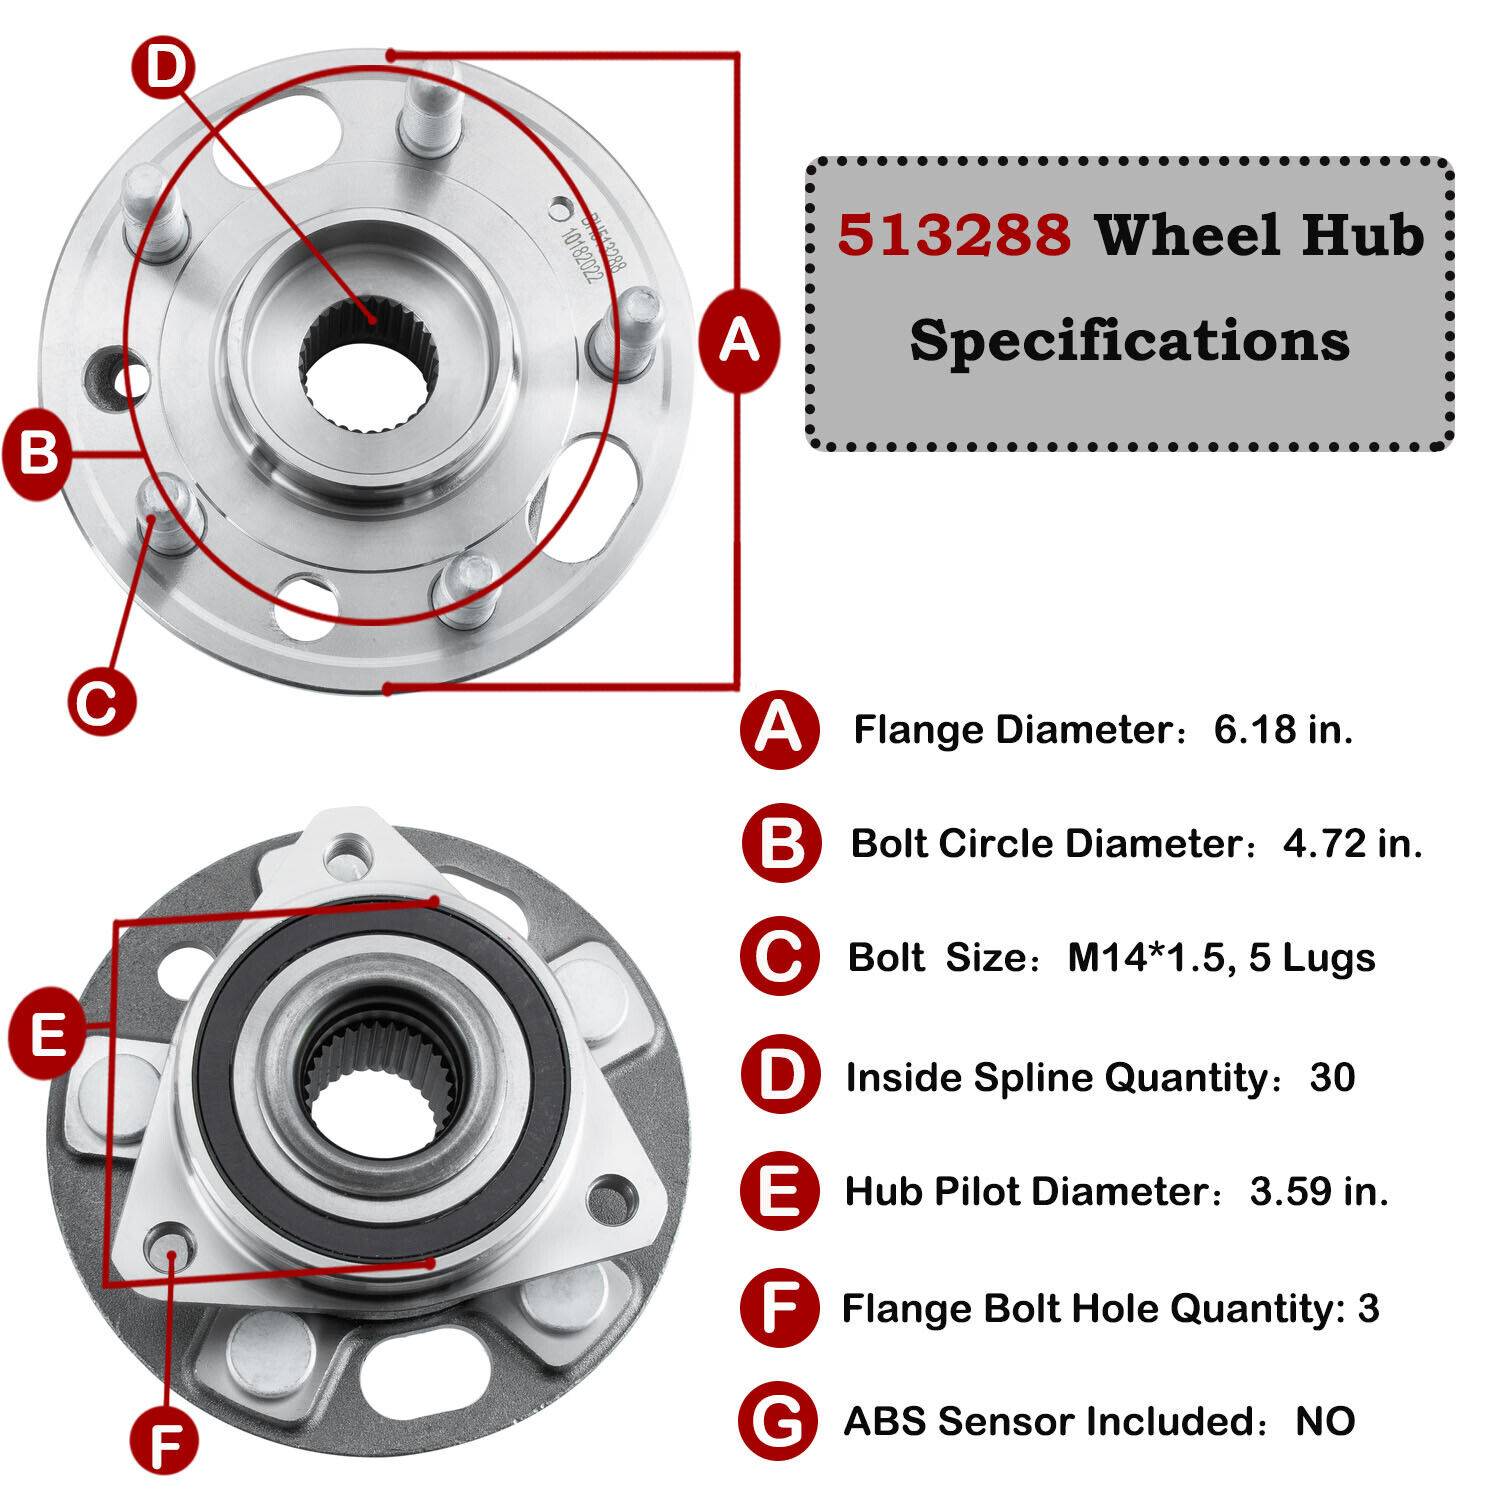 1x Front or Rear Wheel Hub Bearing fit Buick Regal LaCrosse Allure Cadillac CTS